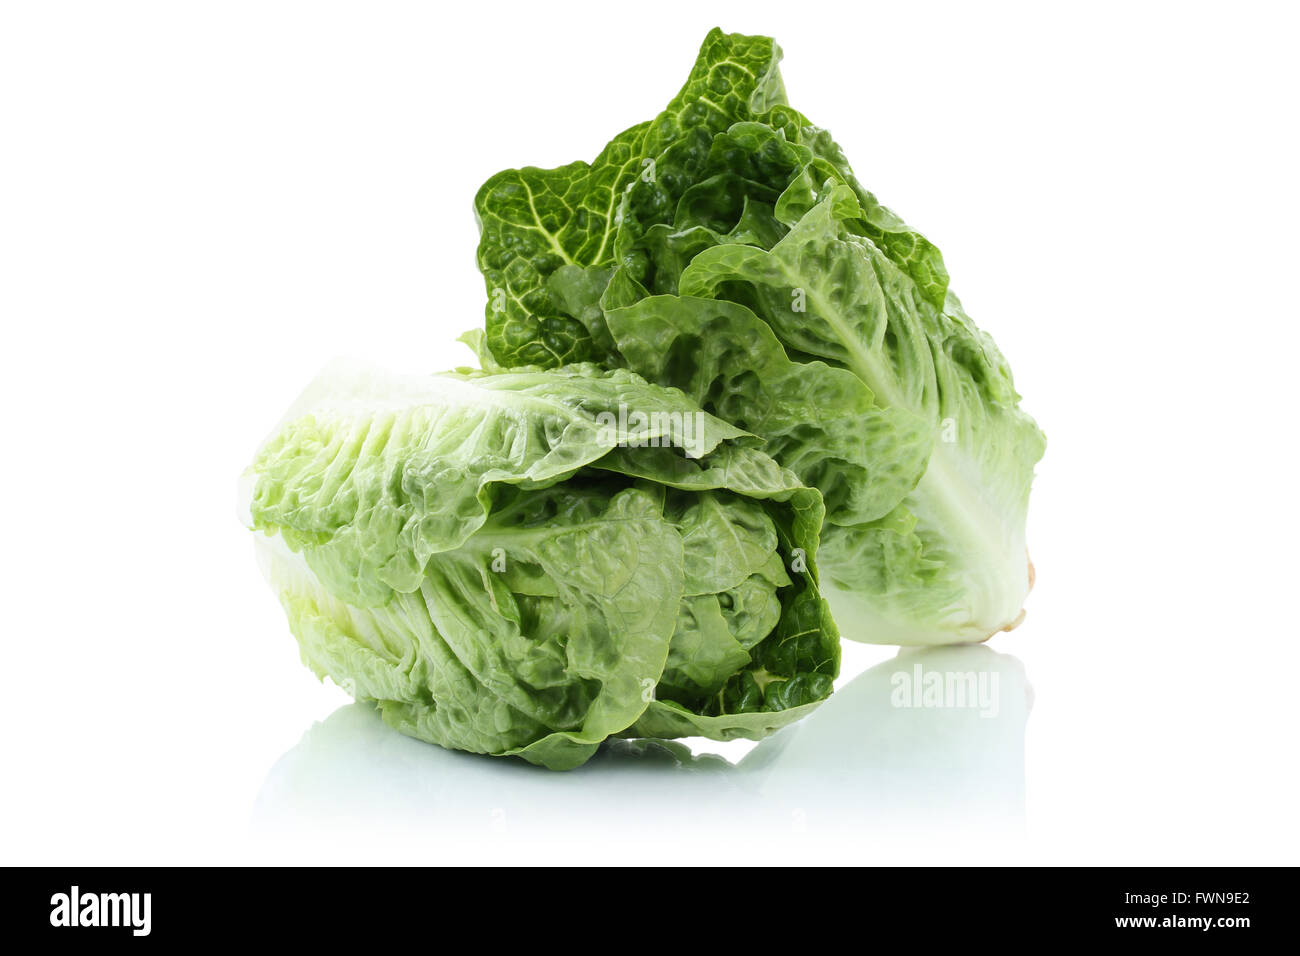 Romaine lettuce vegetable isolated on a white background Stock Photo